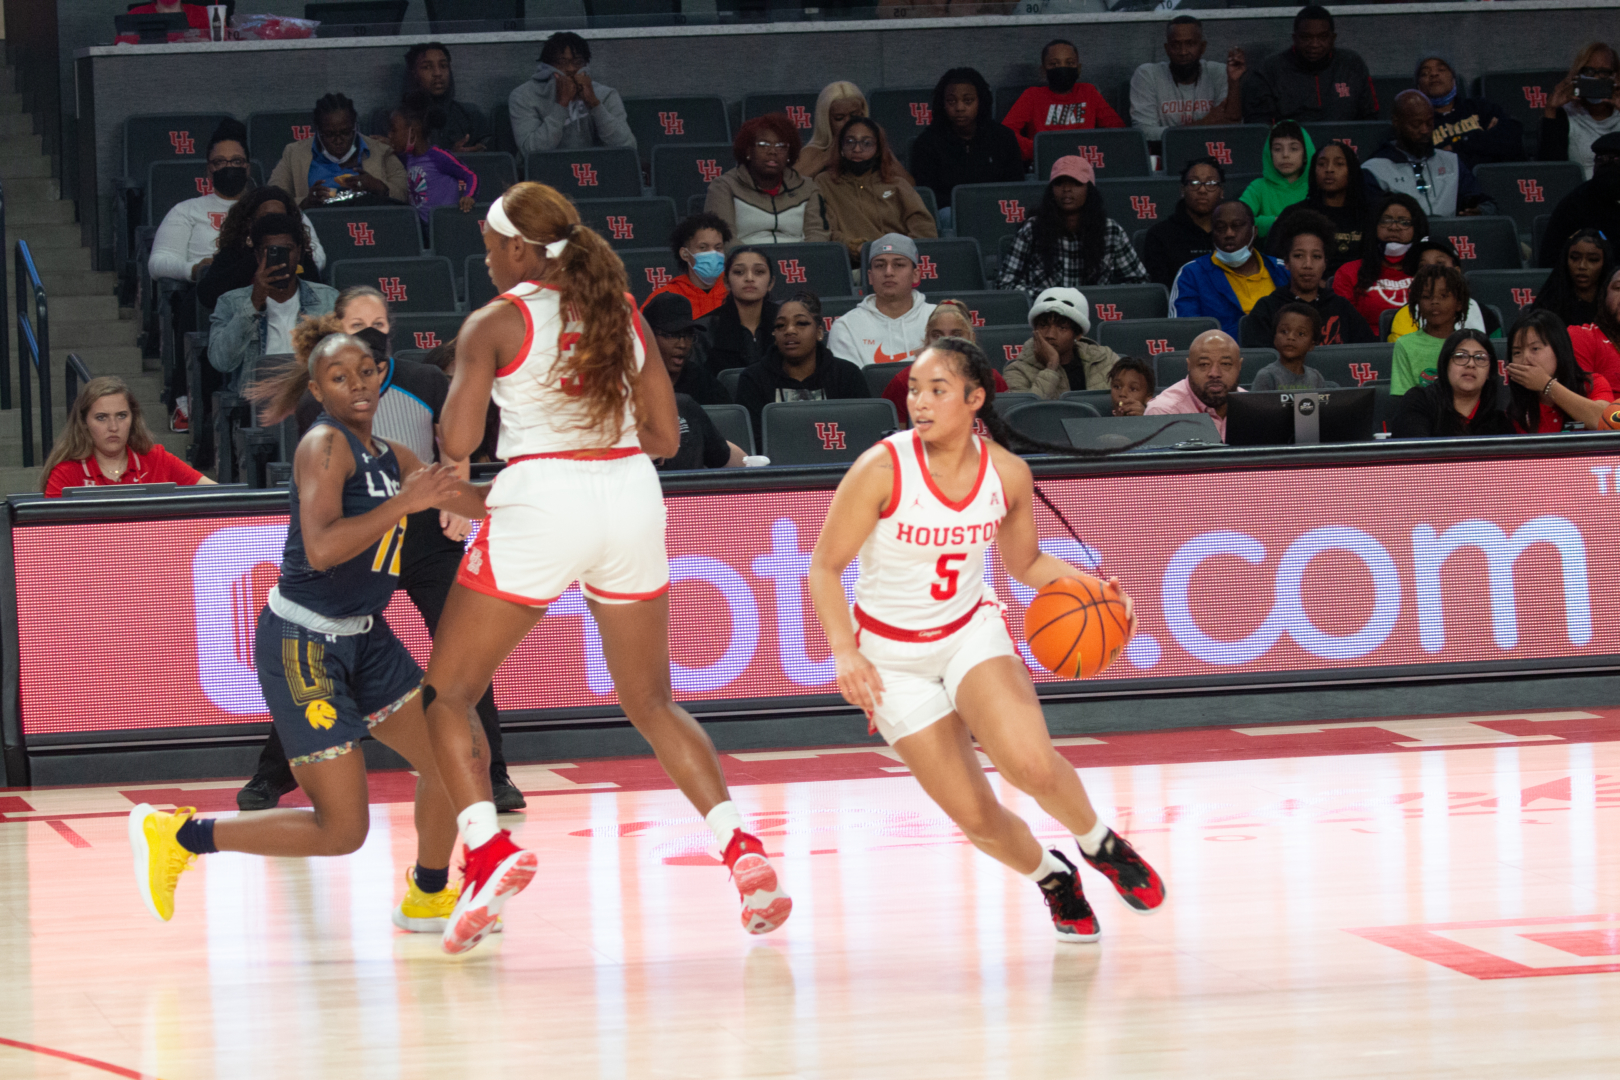 UH women's basketball fell to 3-5 after losing to Alabama on Friday night. | Esther Umoh/The Cougar